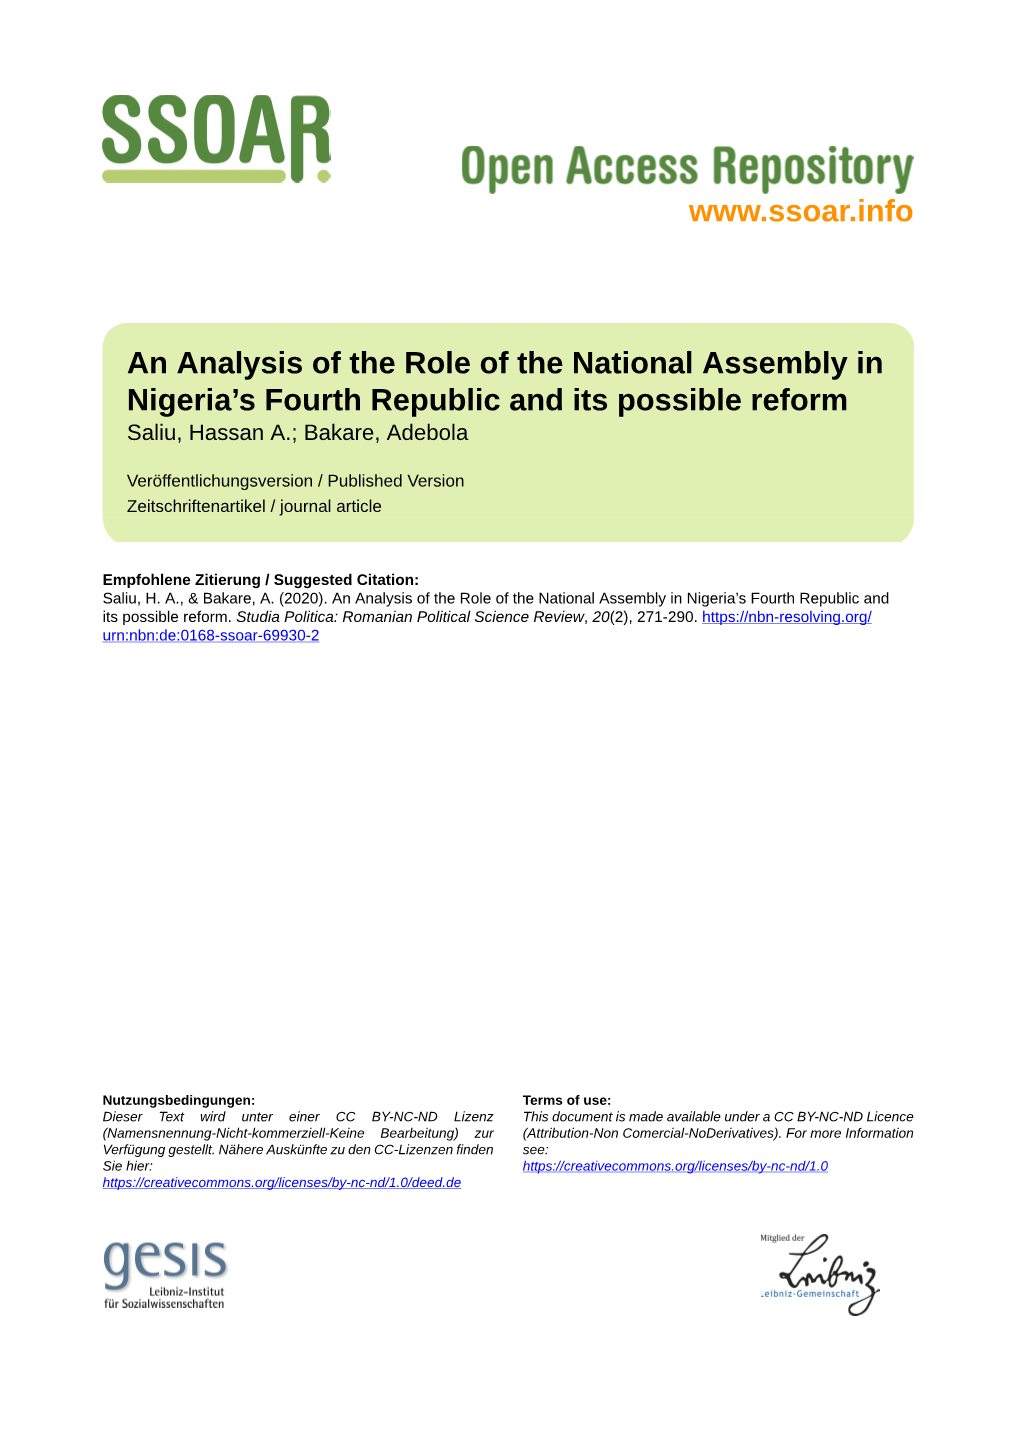 An Analysis of the Role of the National Assembly in Nigeria’S Fourth Republic and Its Possible Reform Saliu, Hassan A.; Bakare, Adebola